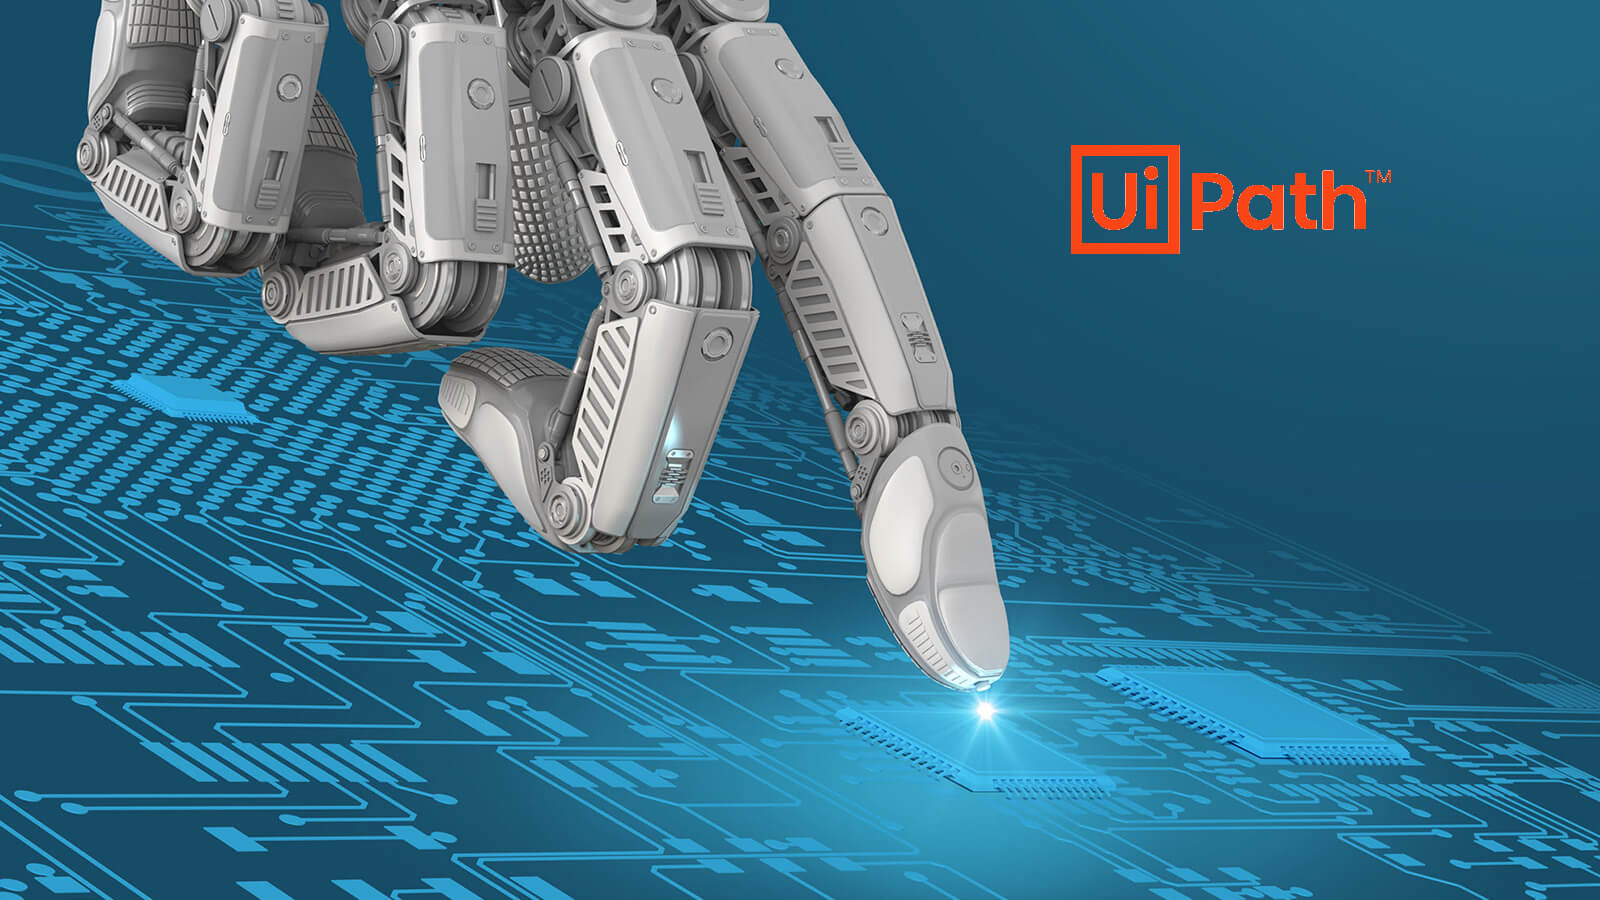 How to Connect your PC to your UiPath Automation | fofx